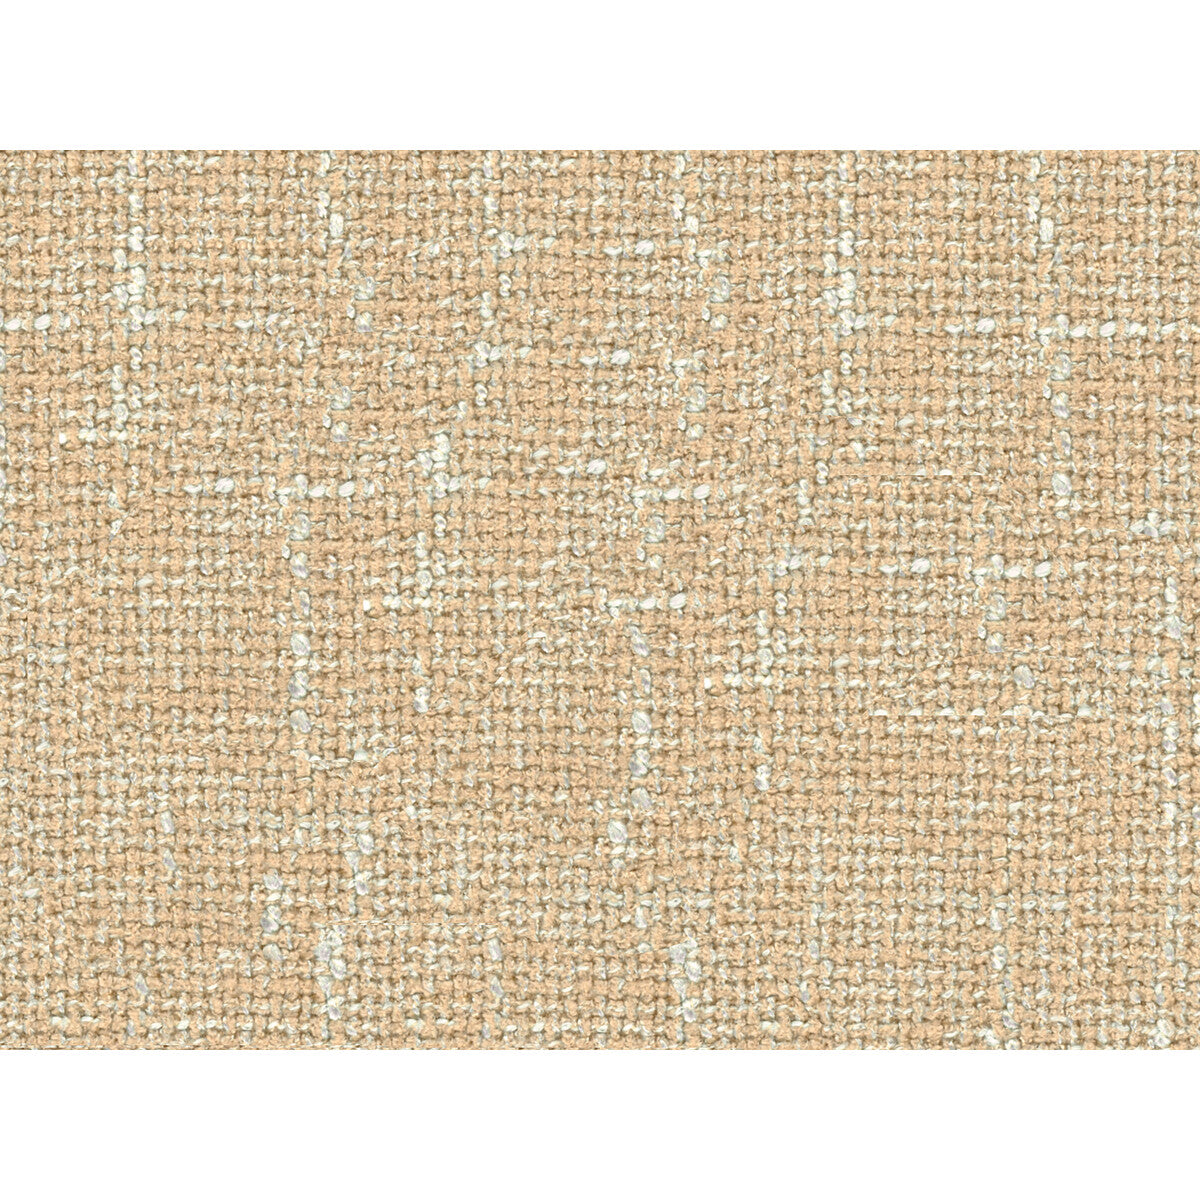 Sant Elm fabric in aloe color - pattern 35075.1615.0 - by Kravet Design in the Alexa Hampton Mallorca collection